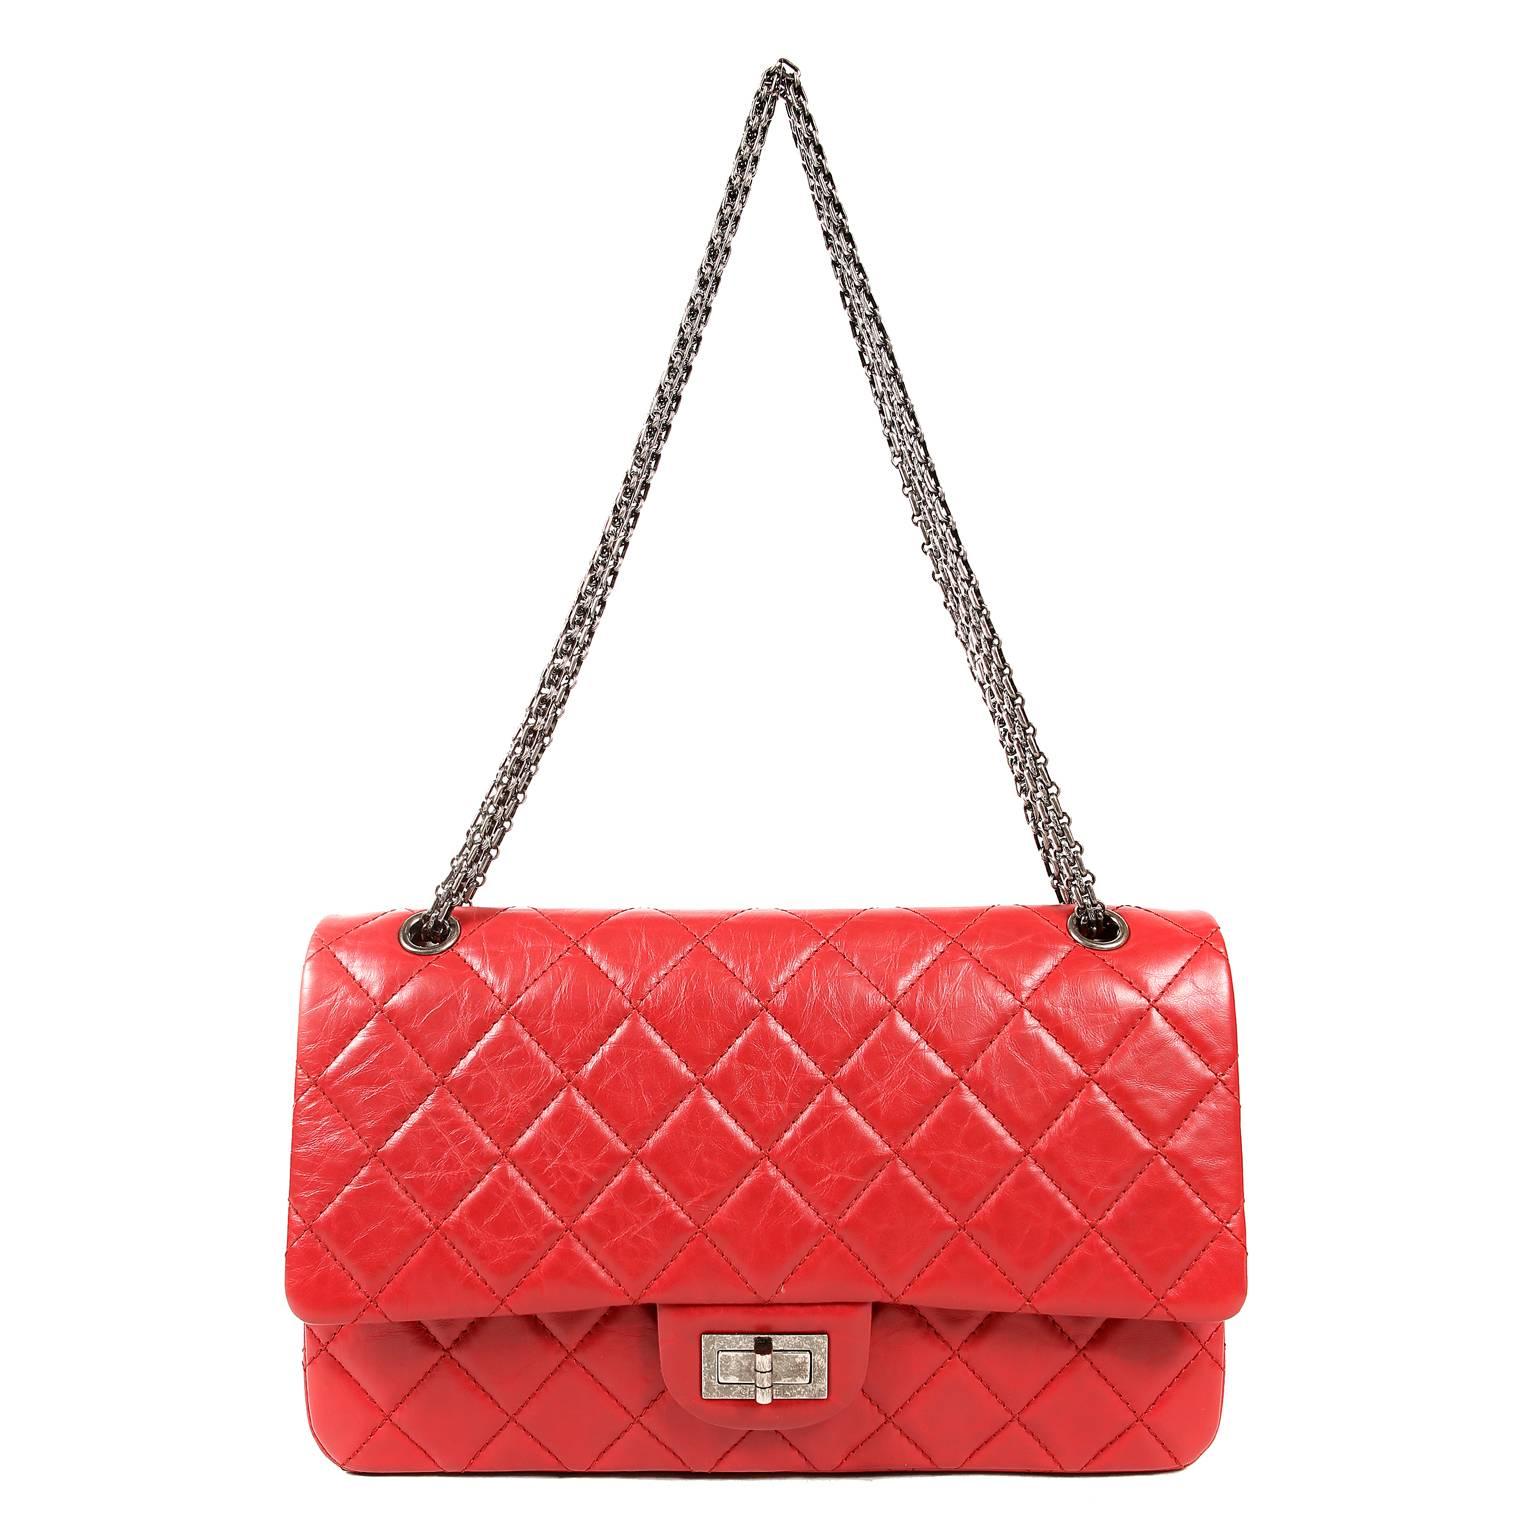 Chanel Red Calfskin 2.55 Reissue Flap Bag- 227 size 6